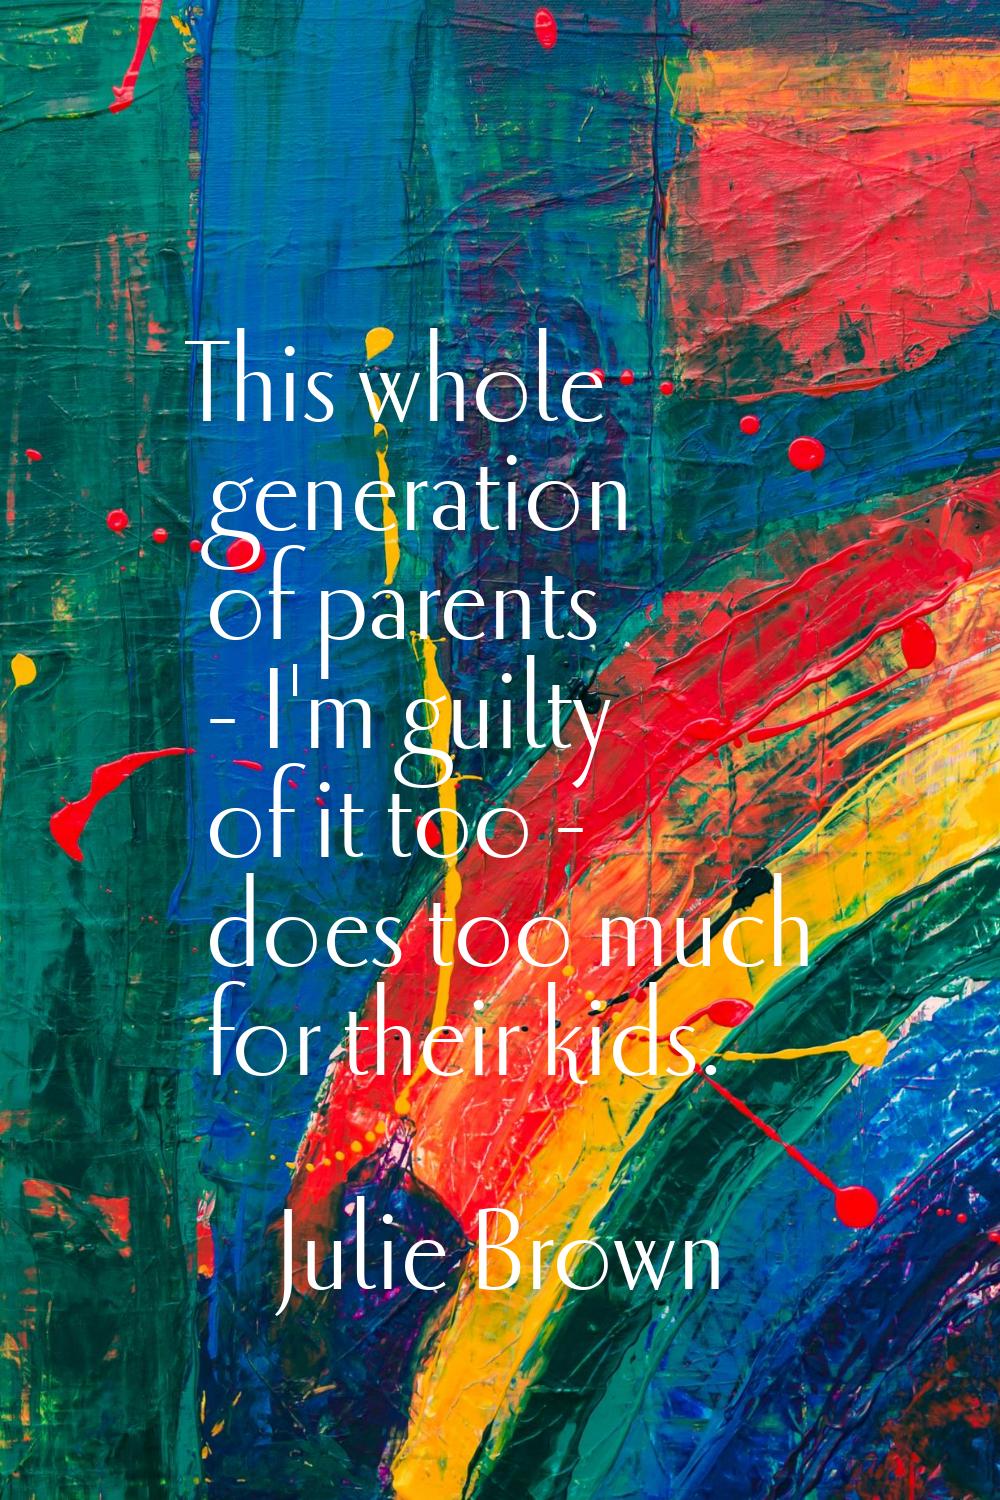 This whole generation of parents - I'm guilty of it too - does too much for their kids.